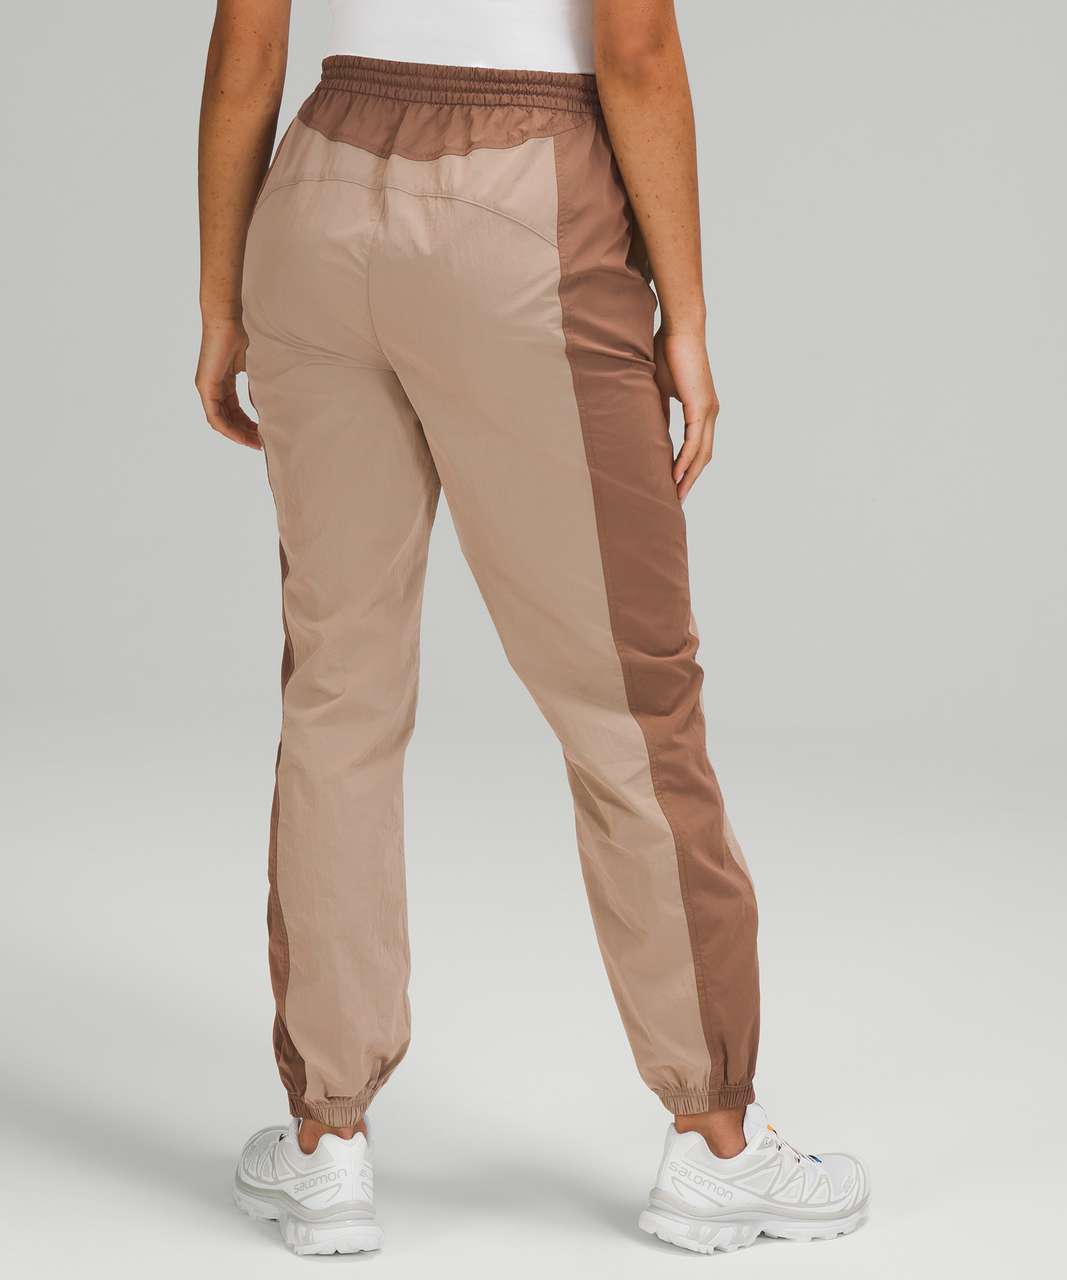 Women Track Pants with Contrast Side Taping